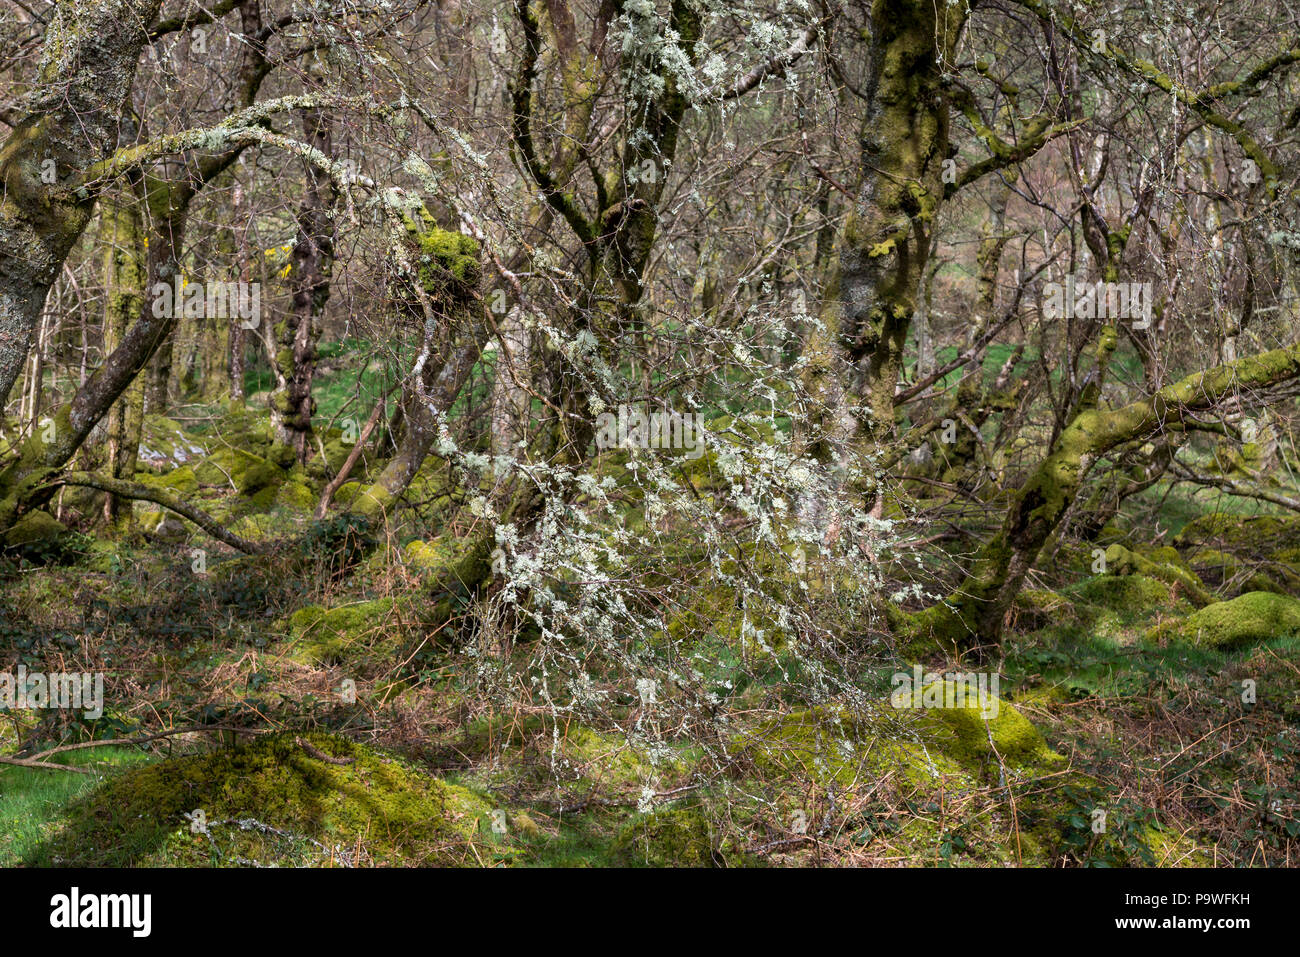 Mosses and lichens growing on trees in the damp climate of Snowdonia, North Wales. Woodland near Coedty reservoir, Dolgarrog, Conwy. Stock Photo